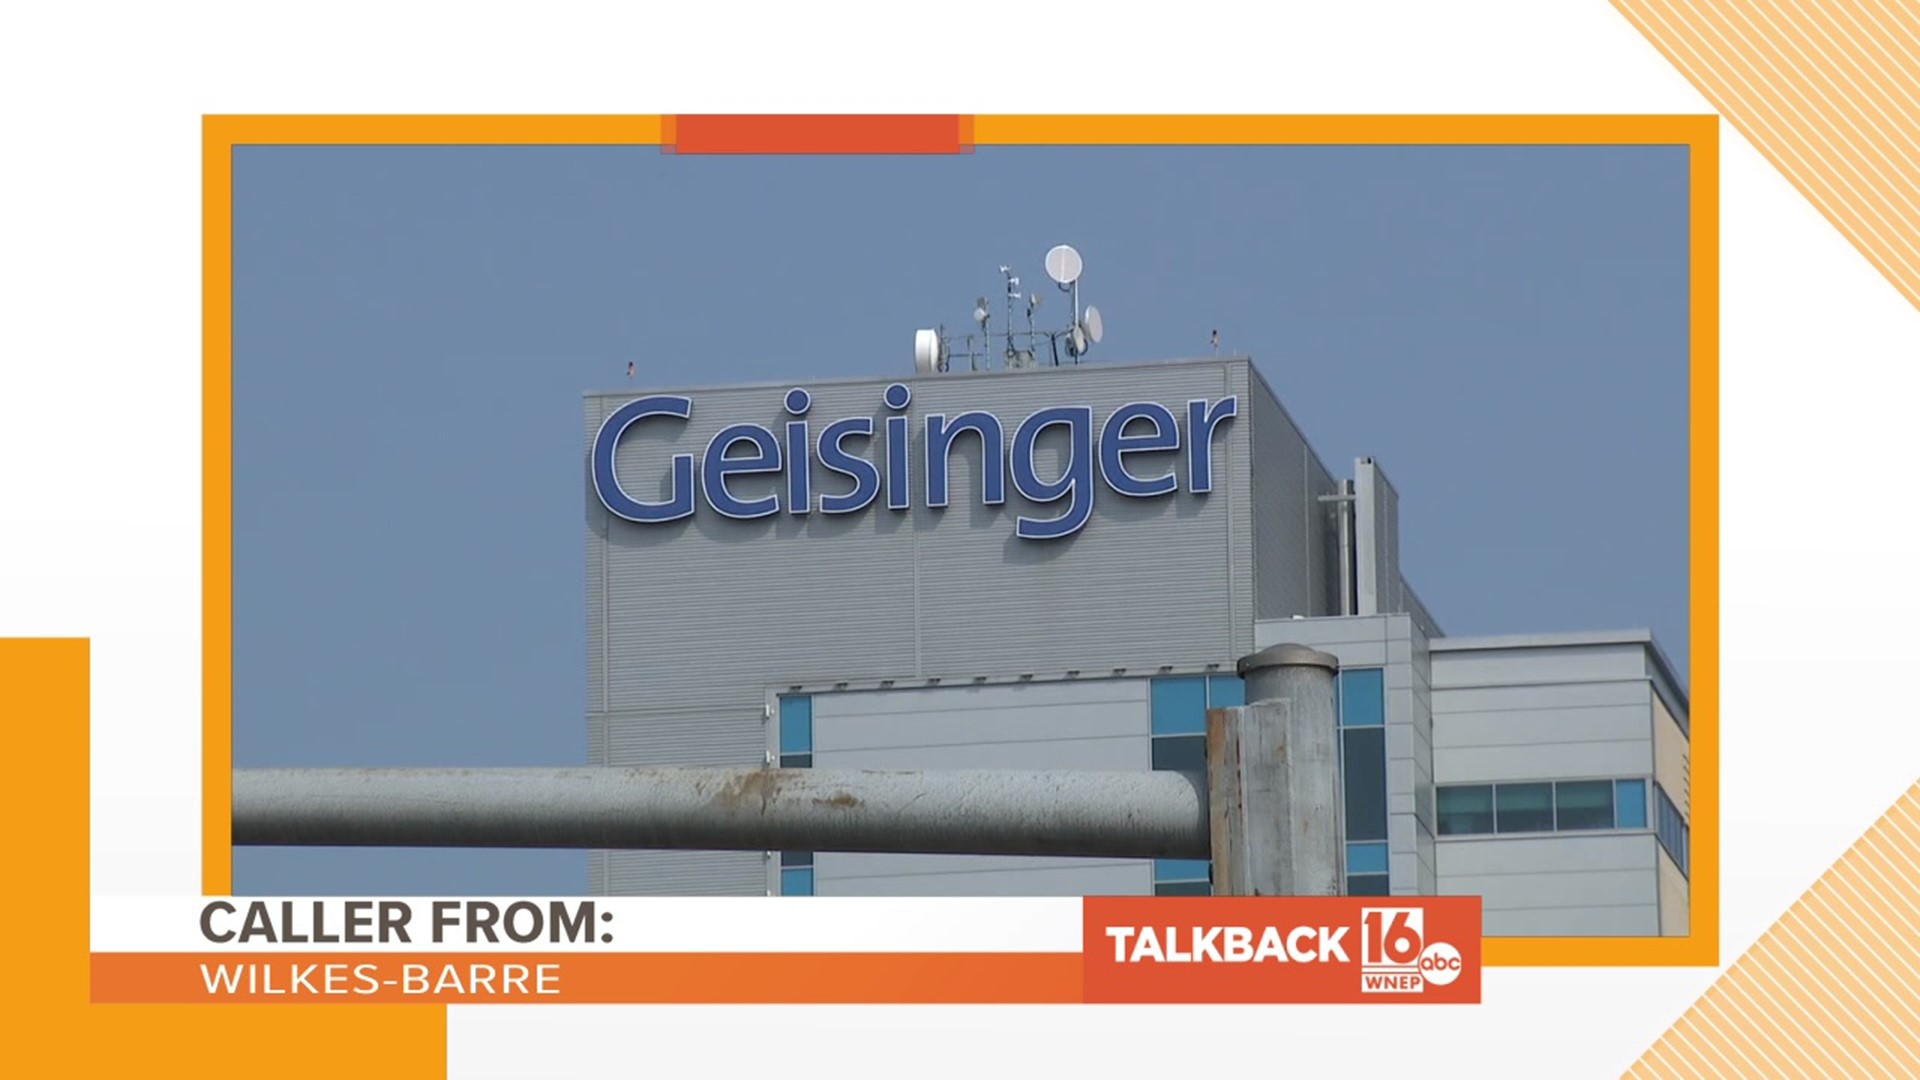 Most Talkback callers feel that workers at Geisinger should be vaccinated for COVID-19.